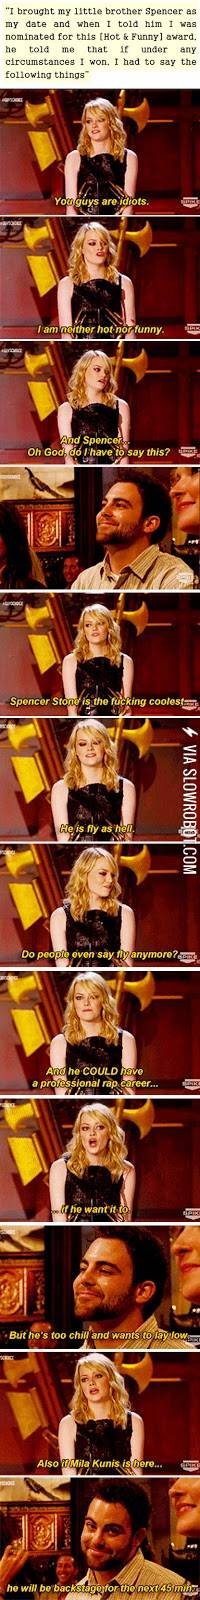 Emma+Stone+Is+The+Best+Sister+Ever%26%238230%3B